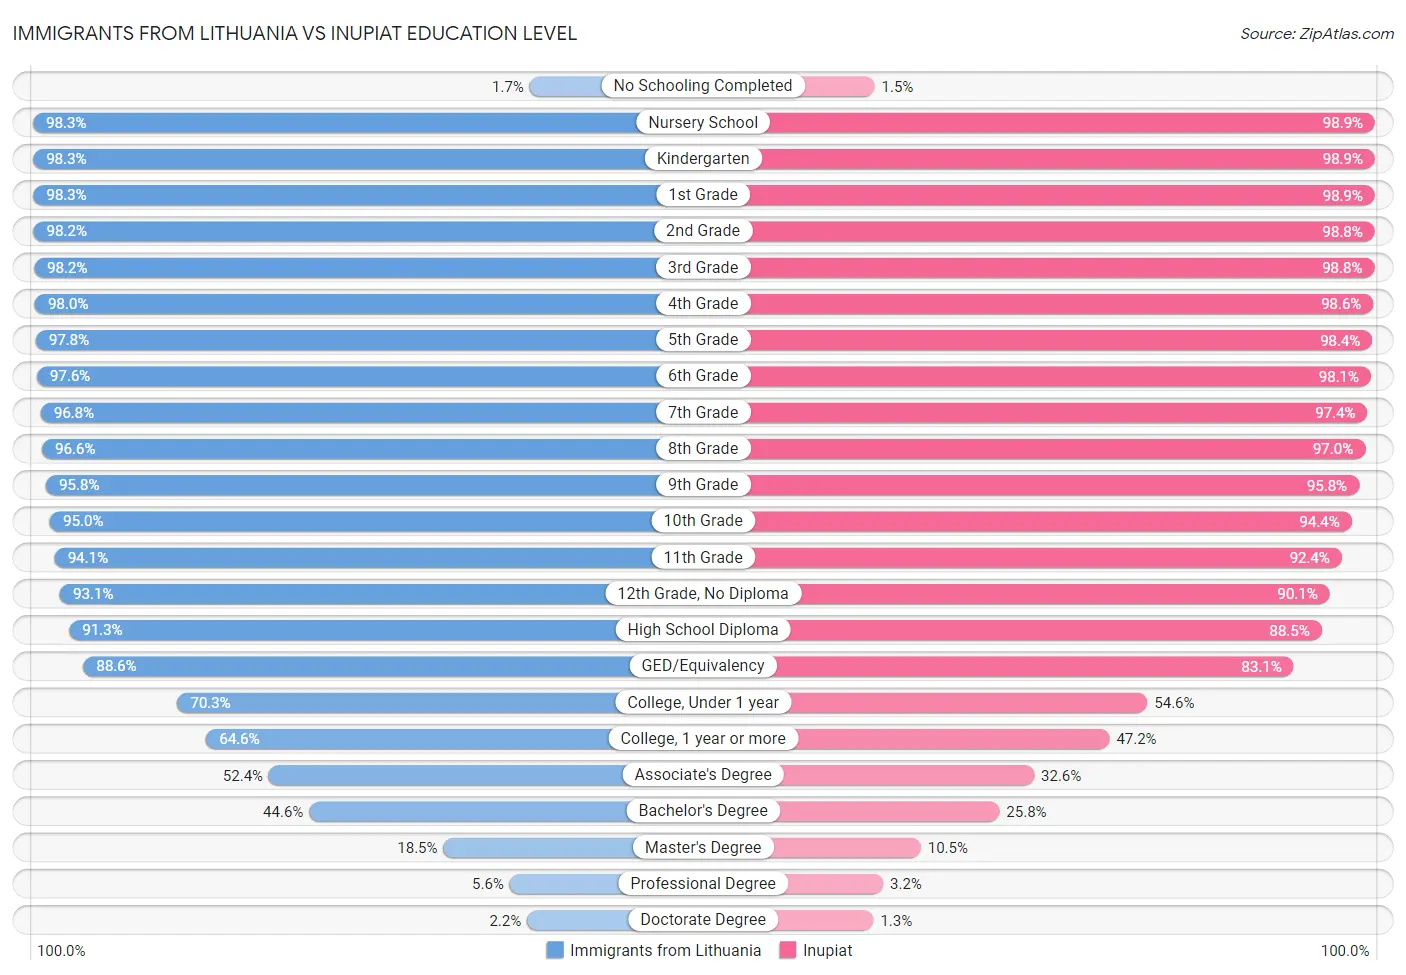 Immigrants from Lithuania vs Inupiat Education Level